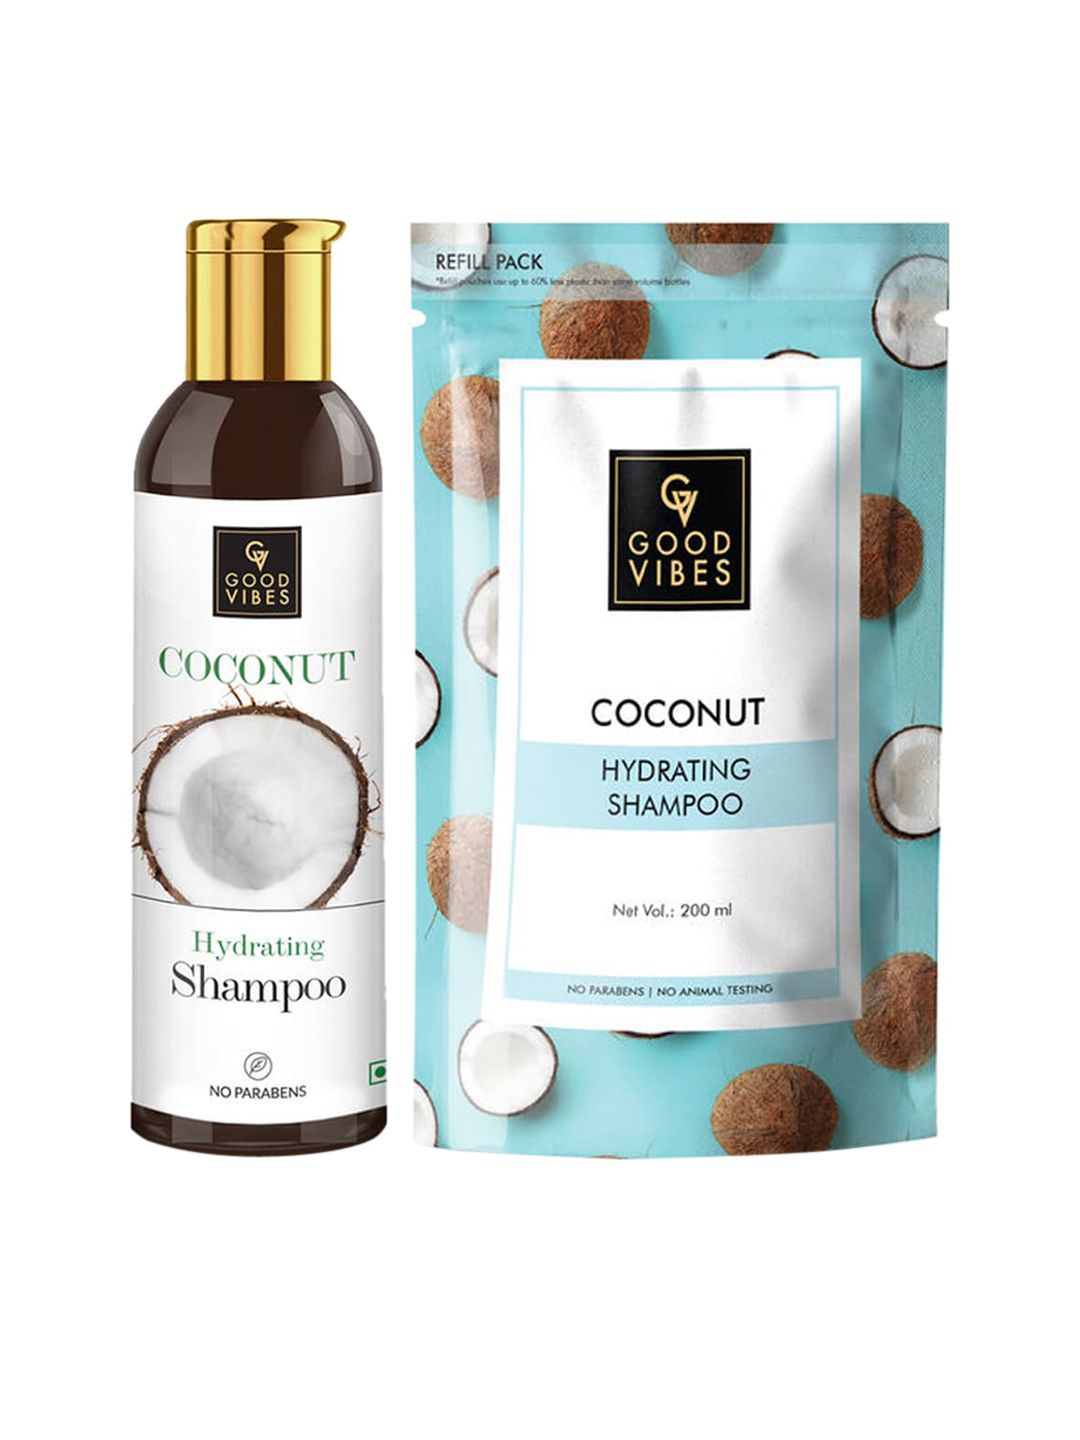 Good Vibes Set Of 2 Hydrating Coconut Shampoo Bottle & Pouch 400ml Price in India